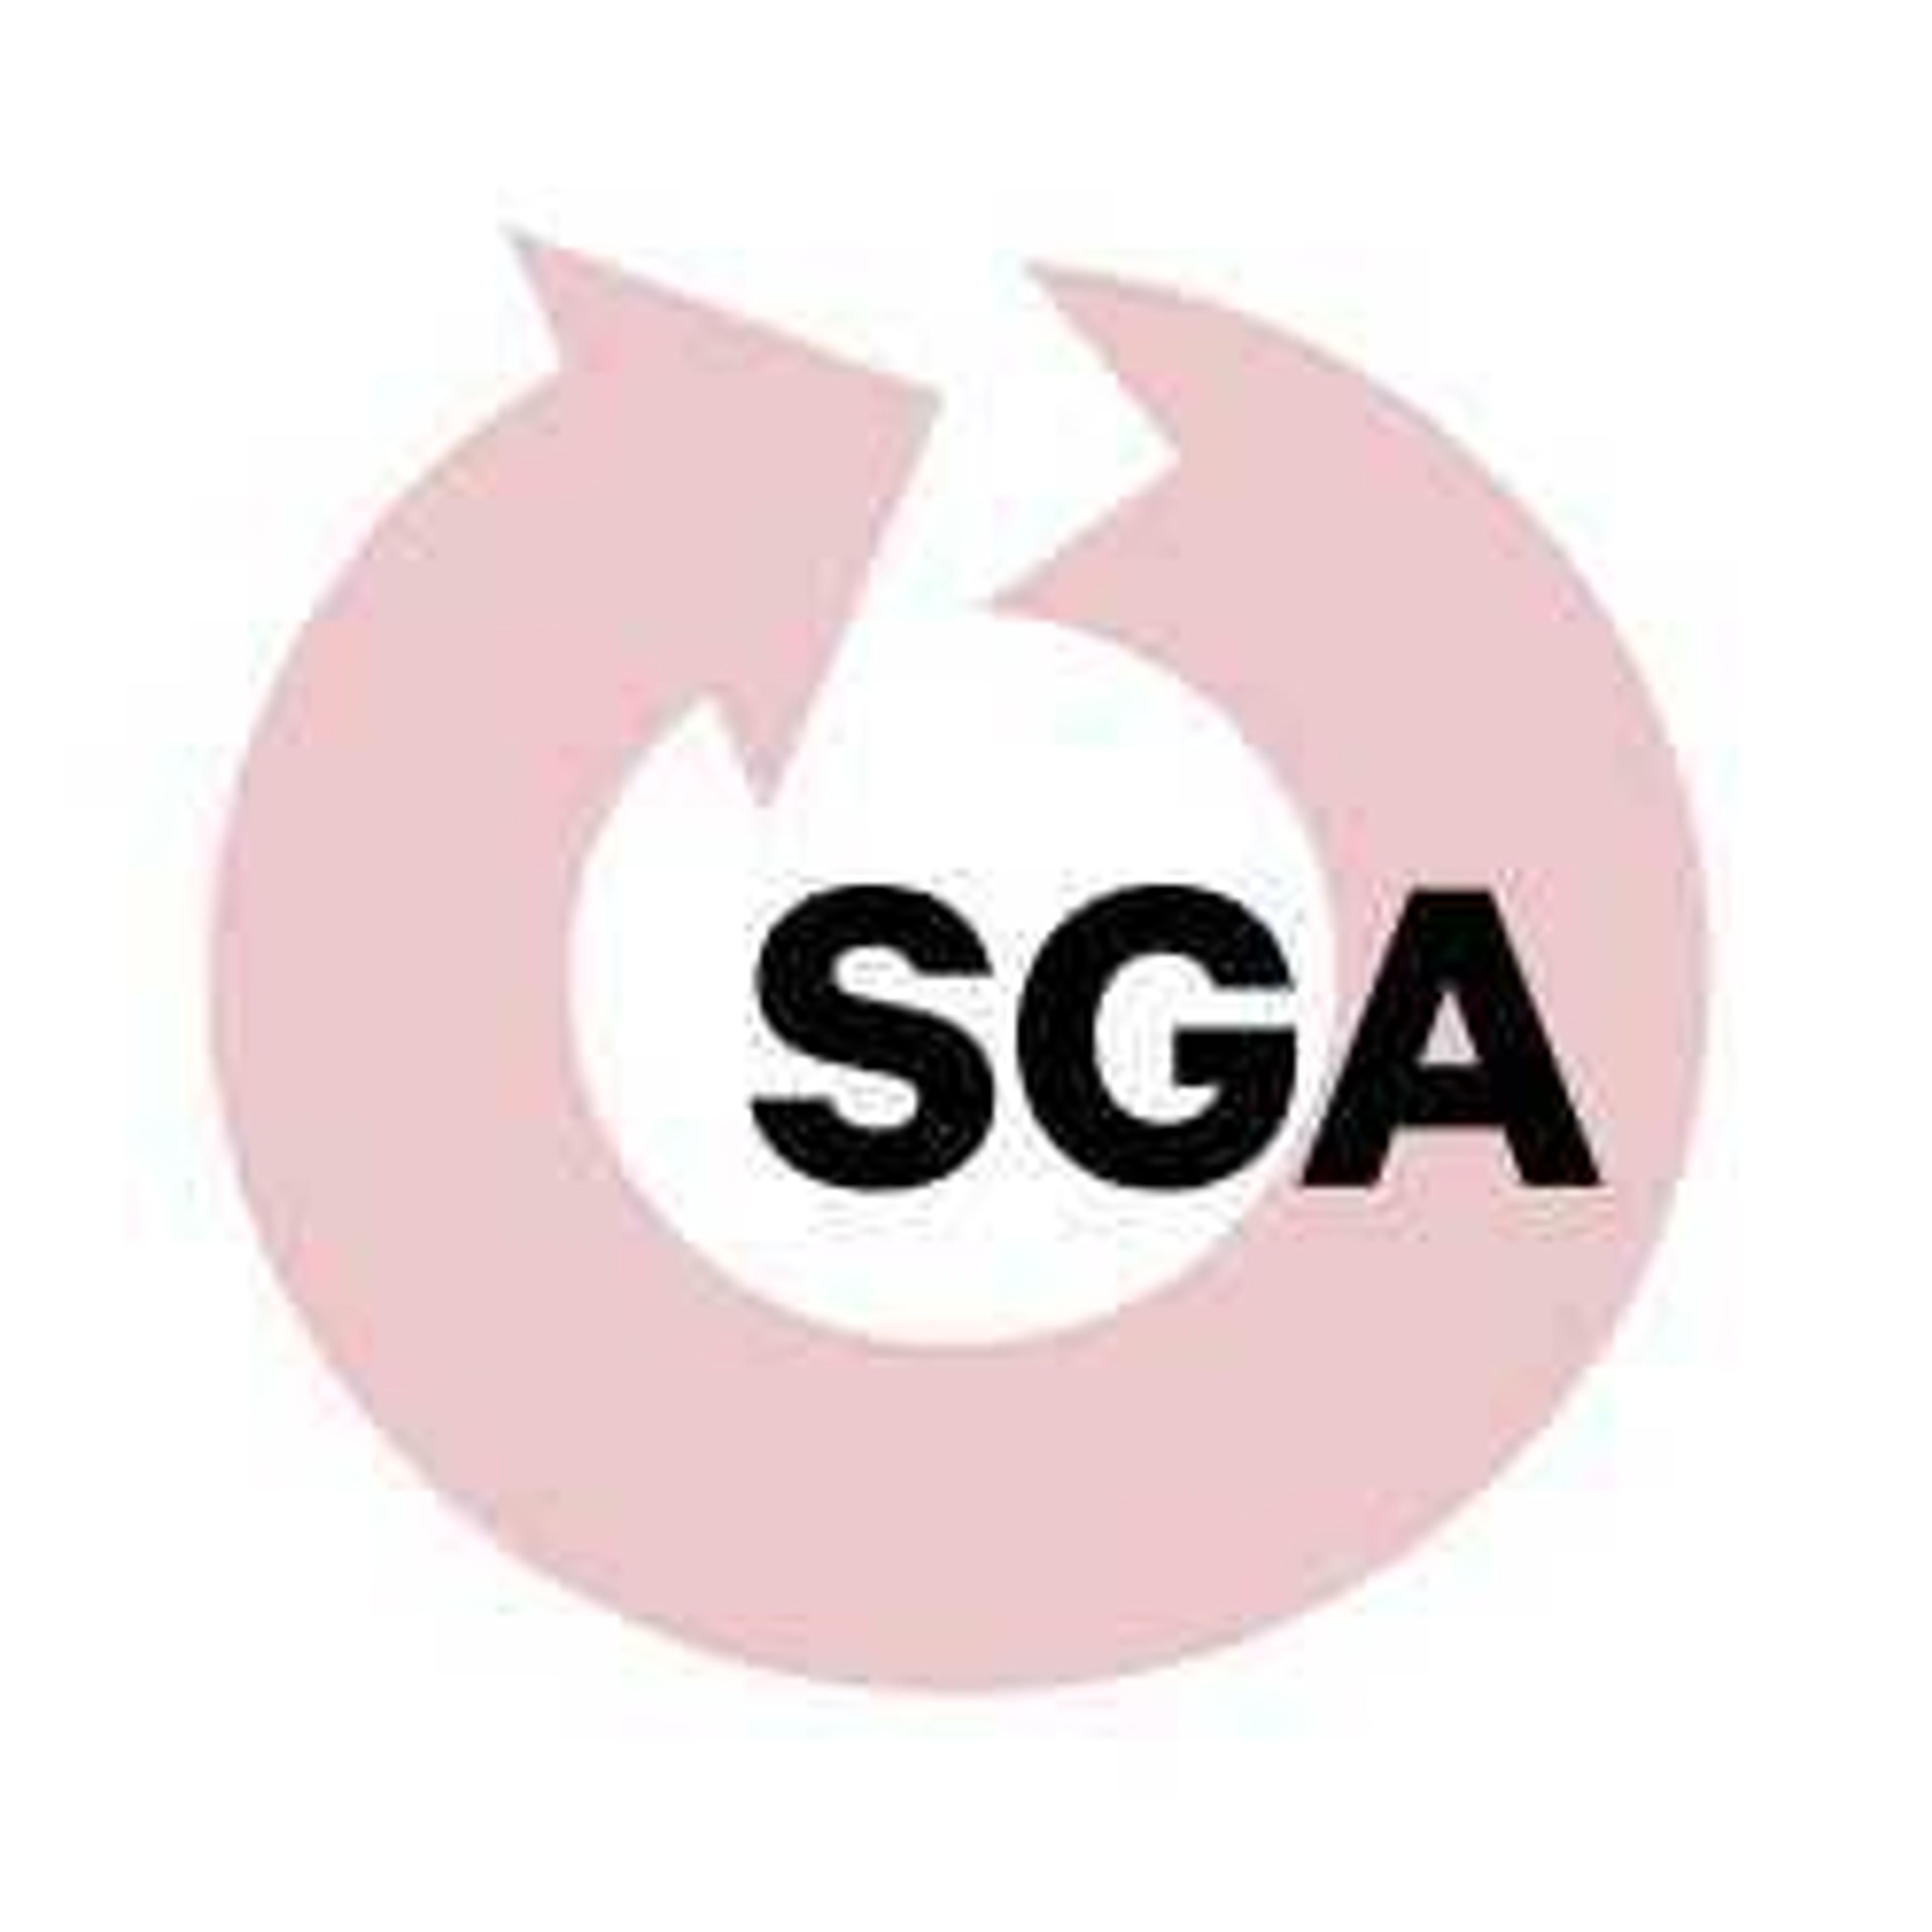 SGA tables funding request for COVID-19 effected conference